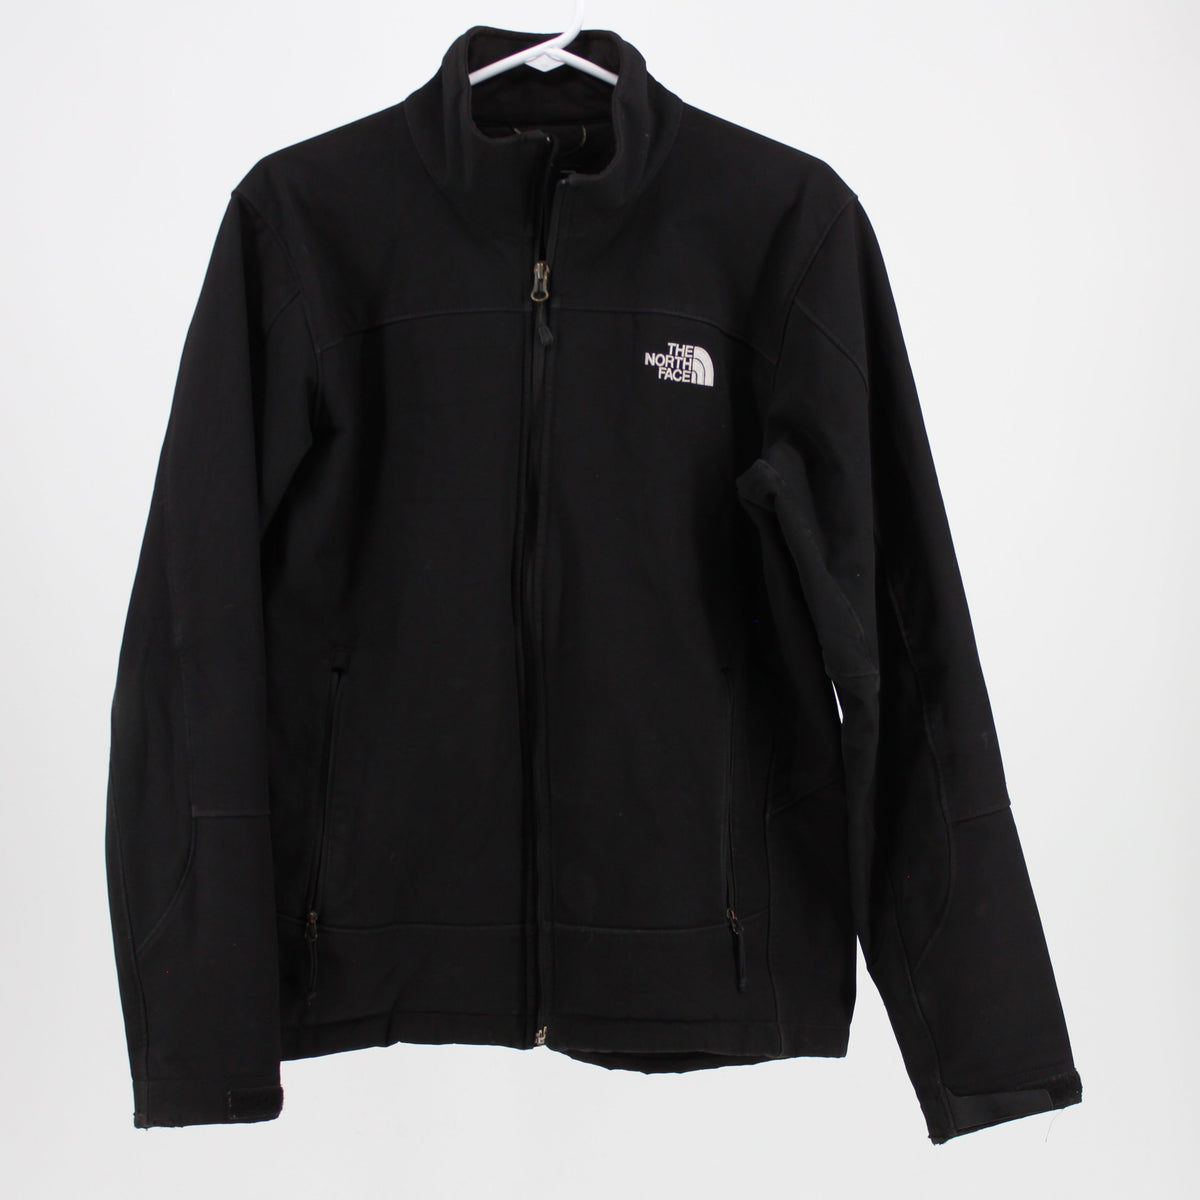 North Face Lightweight Black Jacket with White Logo